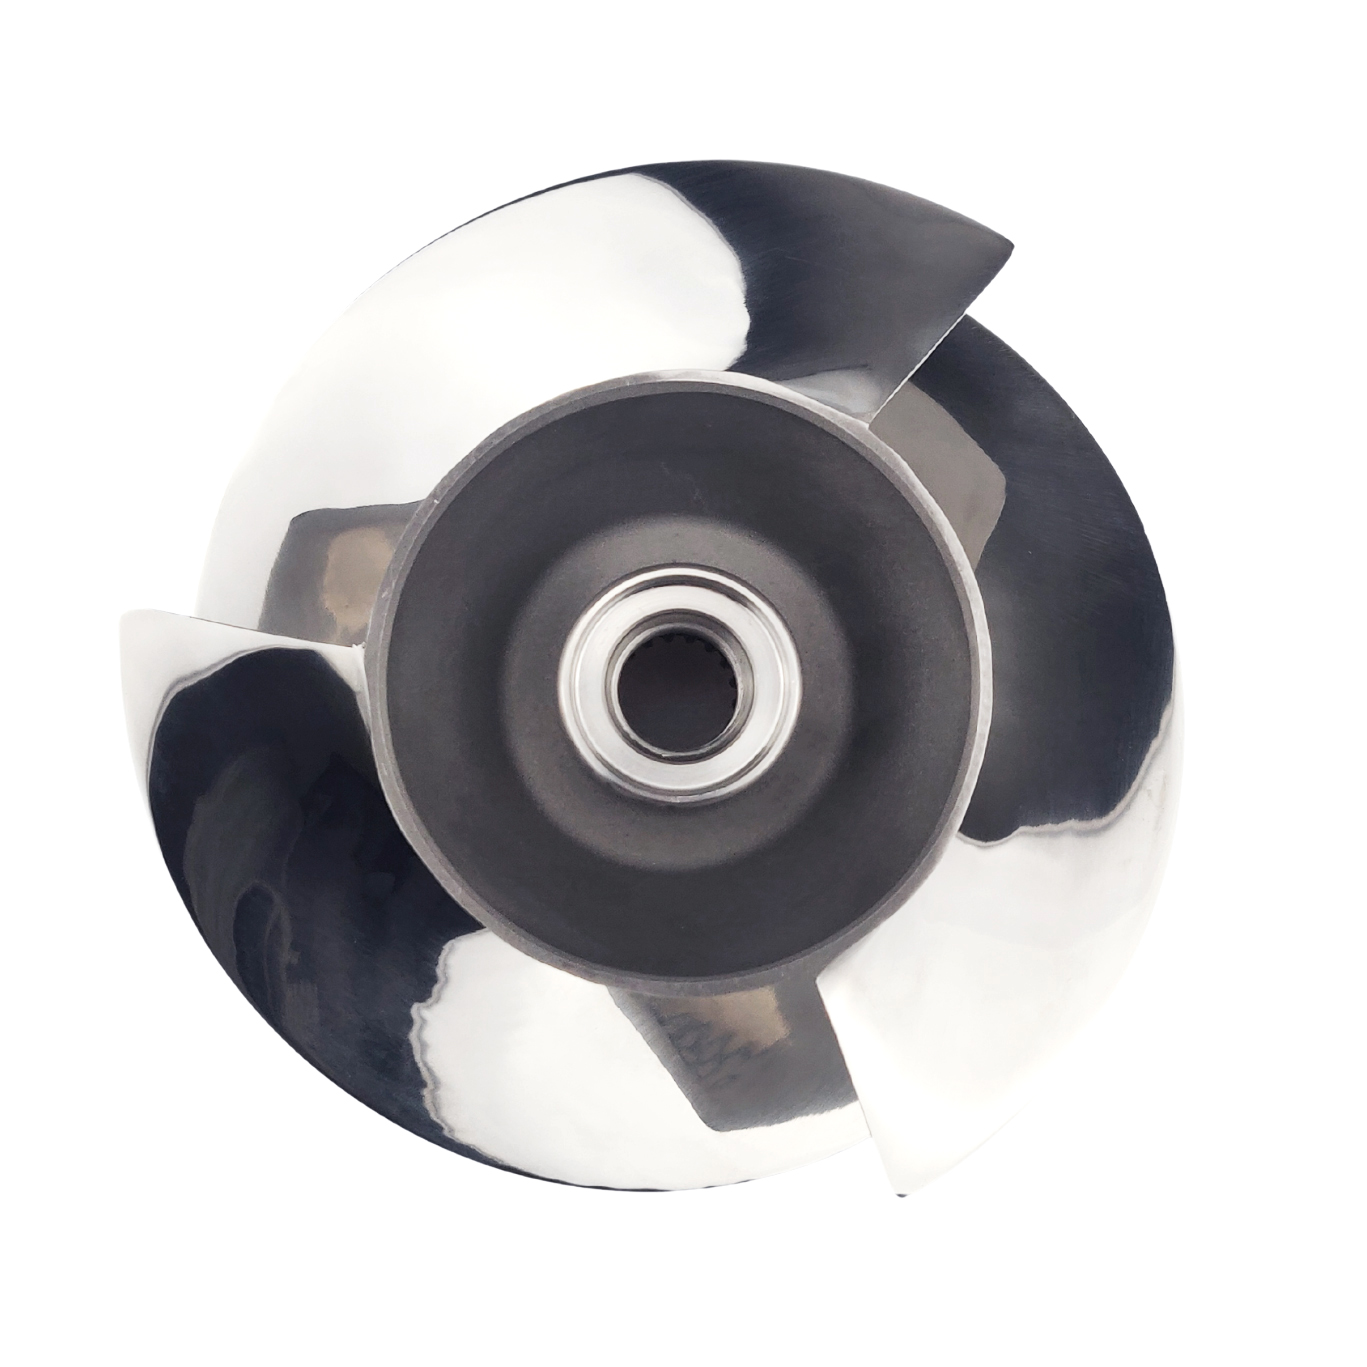 Jet Ski Impeller Diameter 140mm Matched With Seadoo 2014-New SPARK ACE 900 SPARK ACE 900 HO SPARK TRIXX SK-CD-12/17